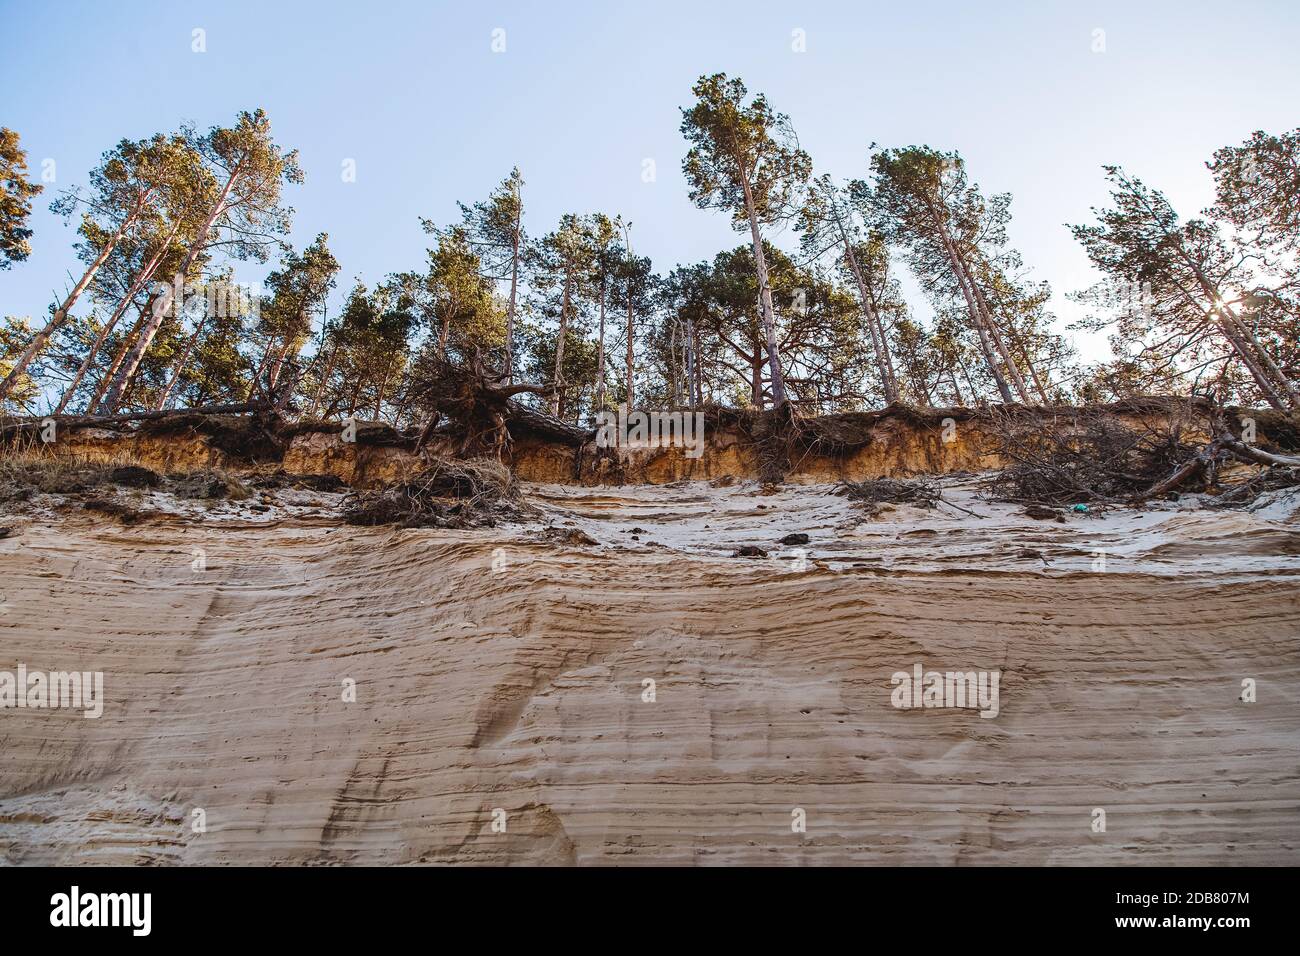 The sandy shore of the Baltic Sea washed out by storms, a threat to the environment Stock Photo